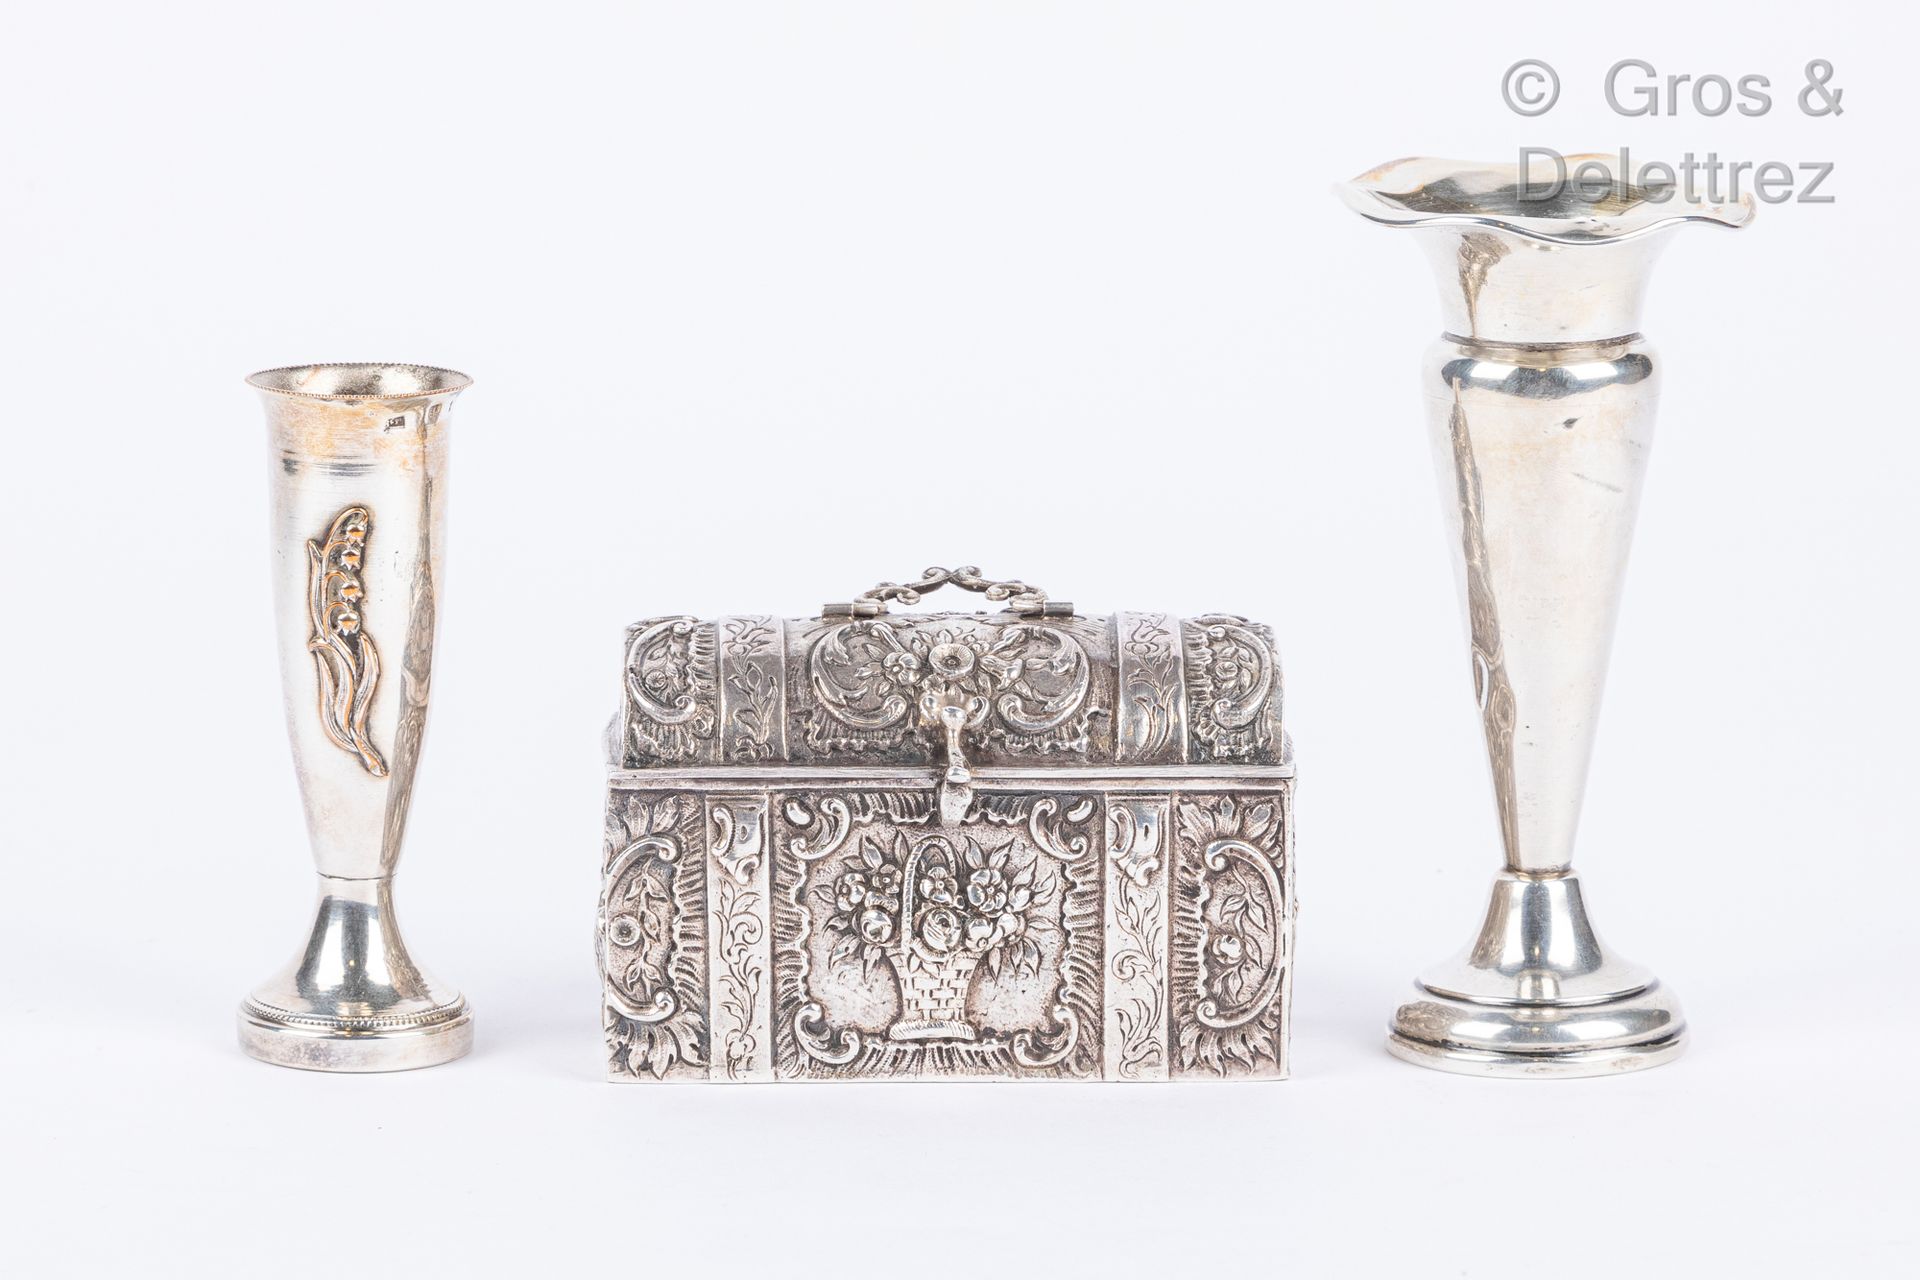 Null Silver lot including :

- a vase soliflore, English work

- a miniature che&hellip;